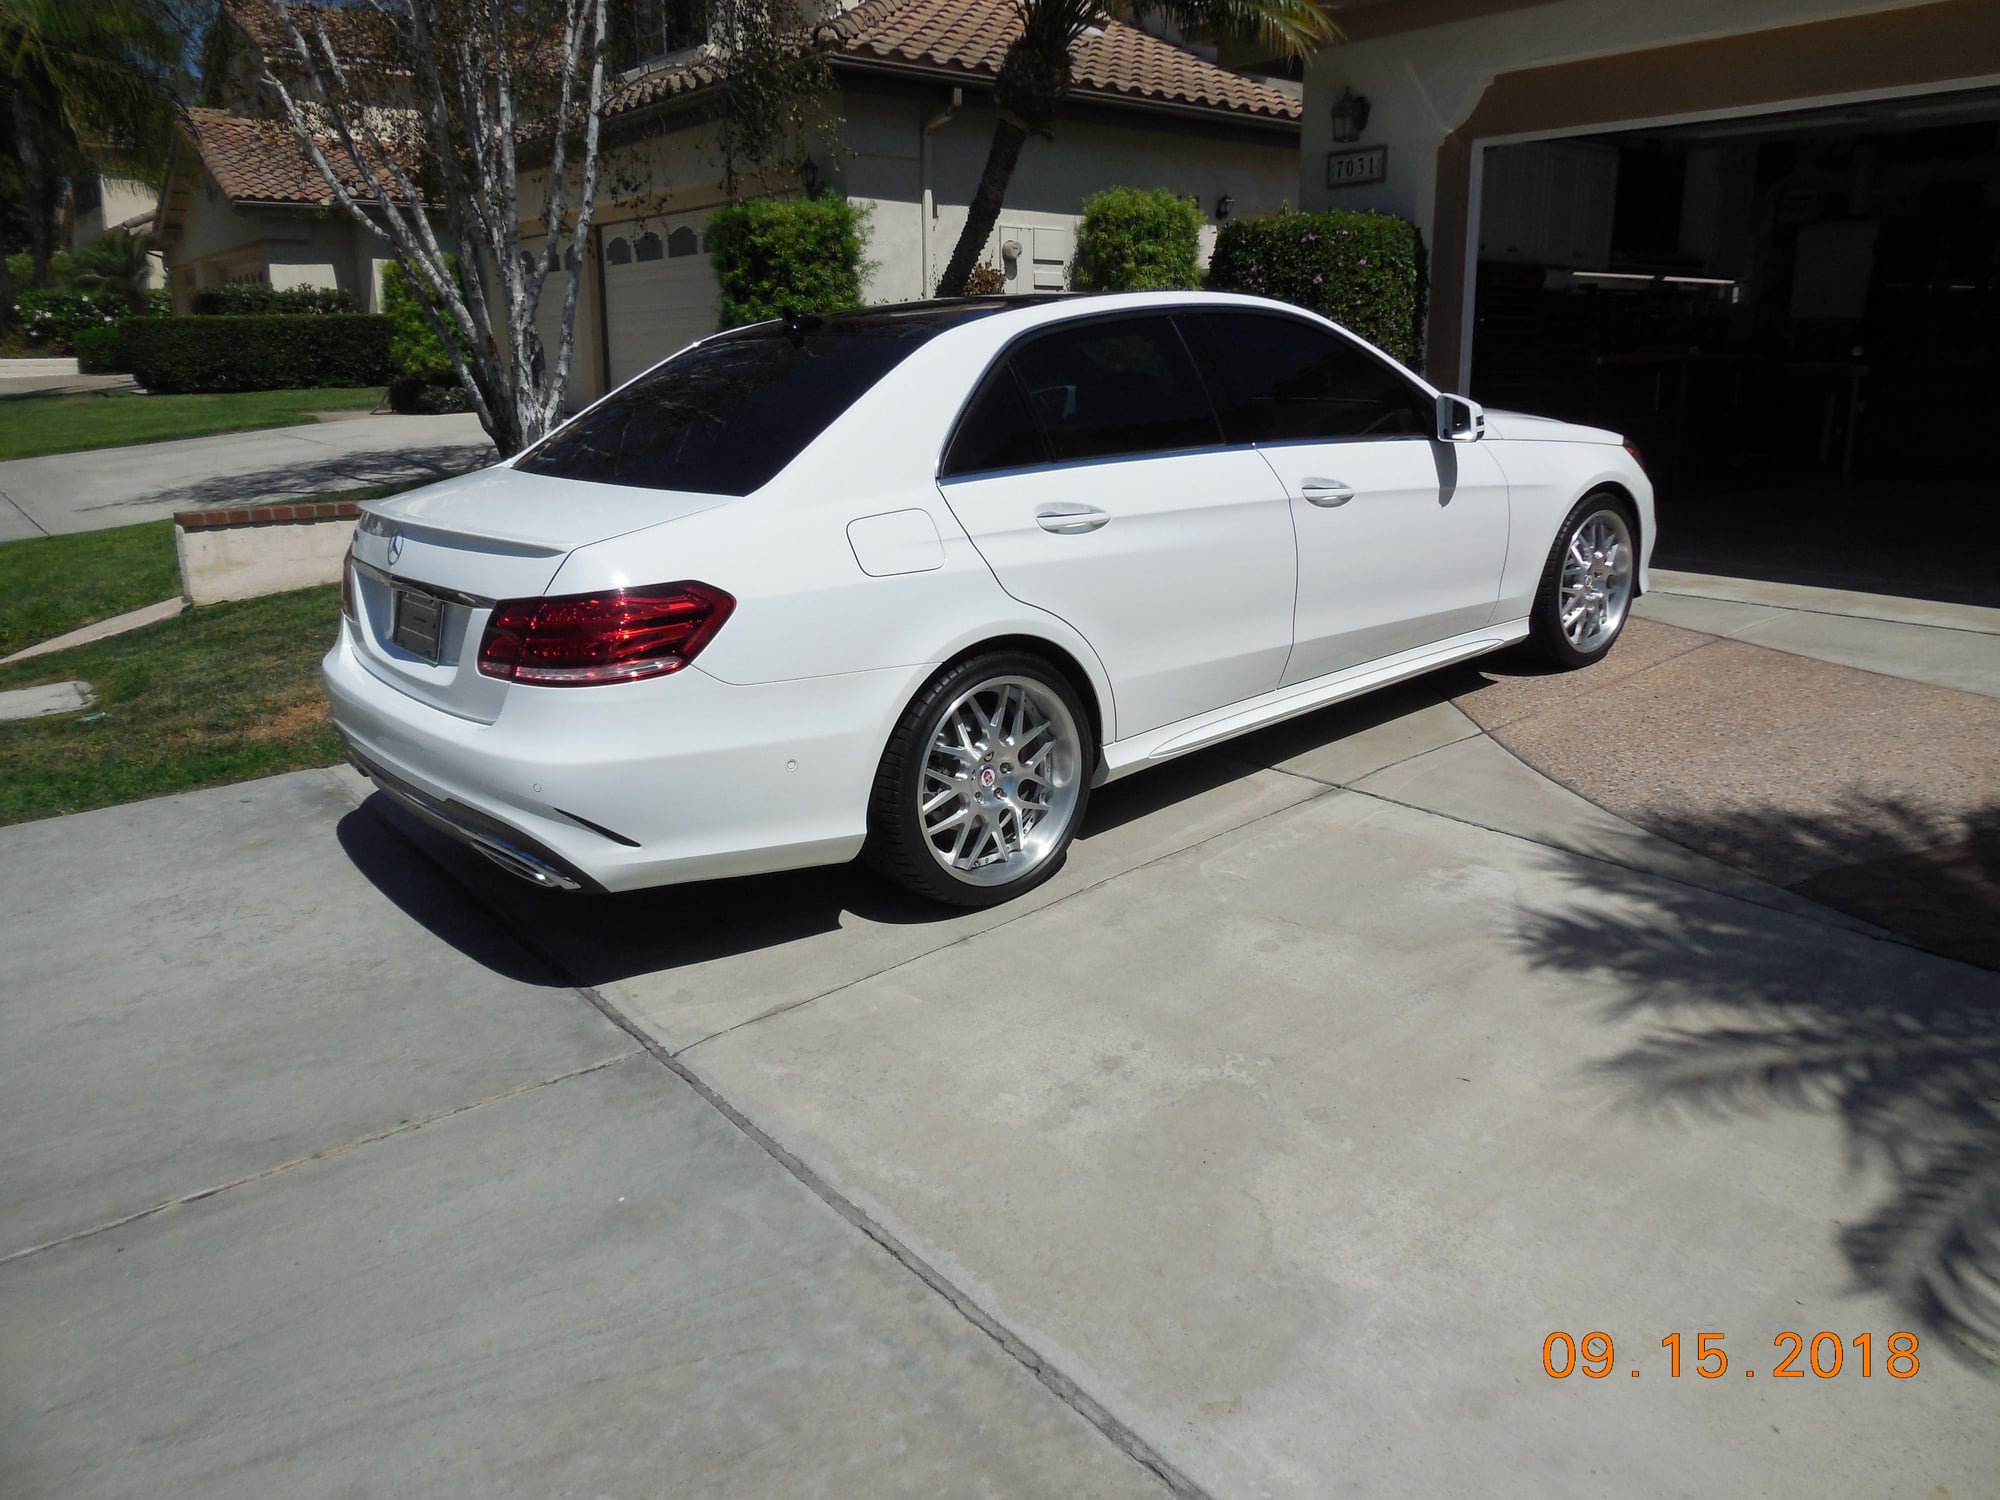 Wheels and Tires/Axles - HRE 590R 3 piece wheels with Michelin tires - Used - 2012 to 2016 Mercedes-Benz E350 - 2008 to 2011 Mercedes-Benz C63 AMG - Carlsbad, CA 92011, United States